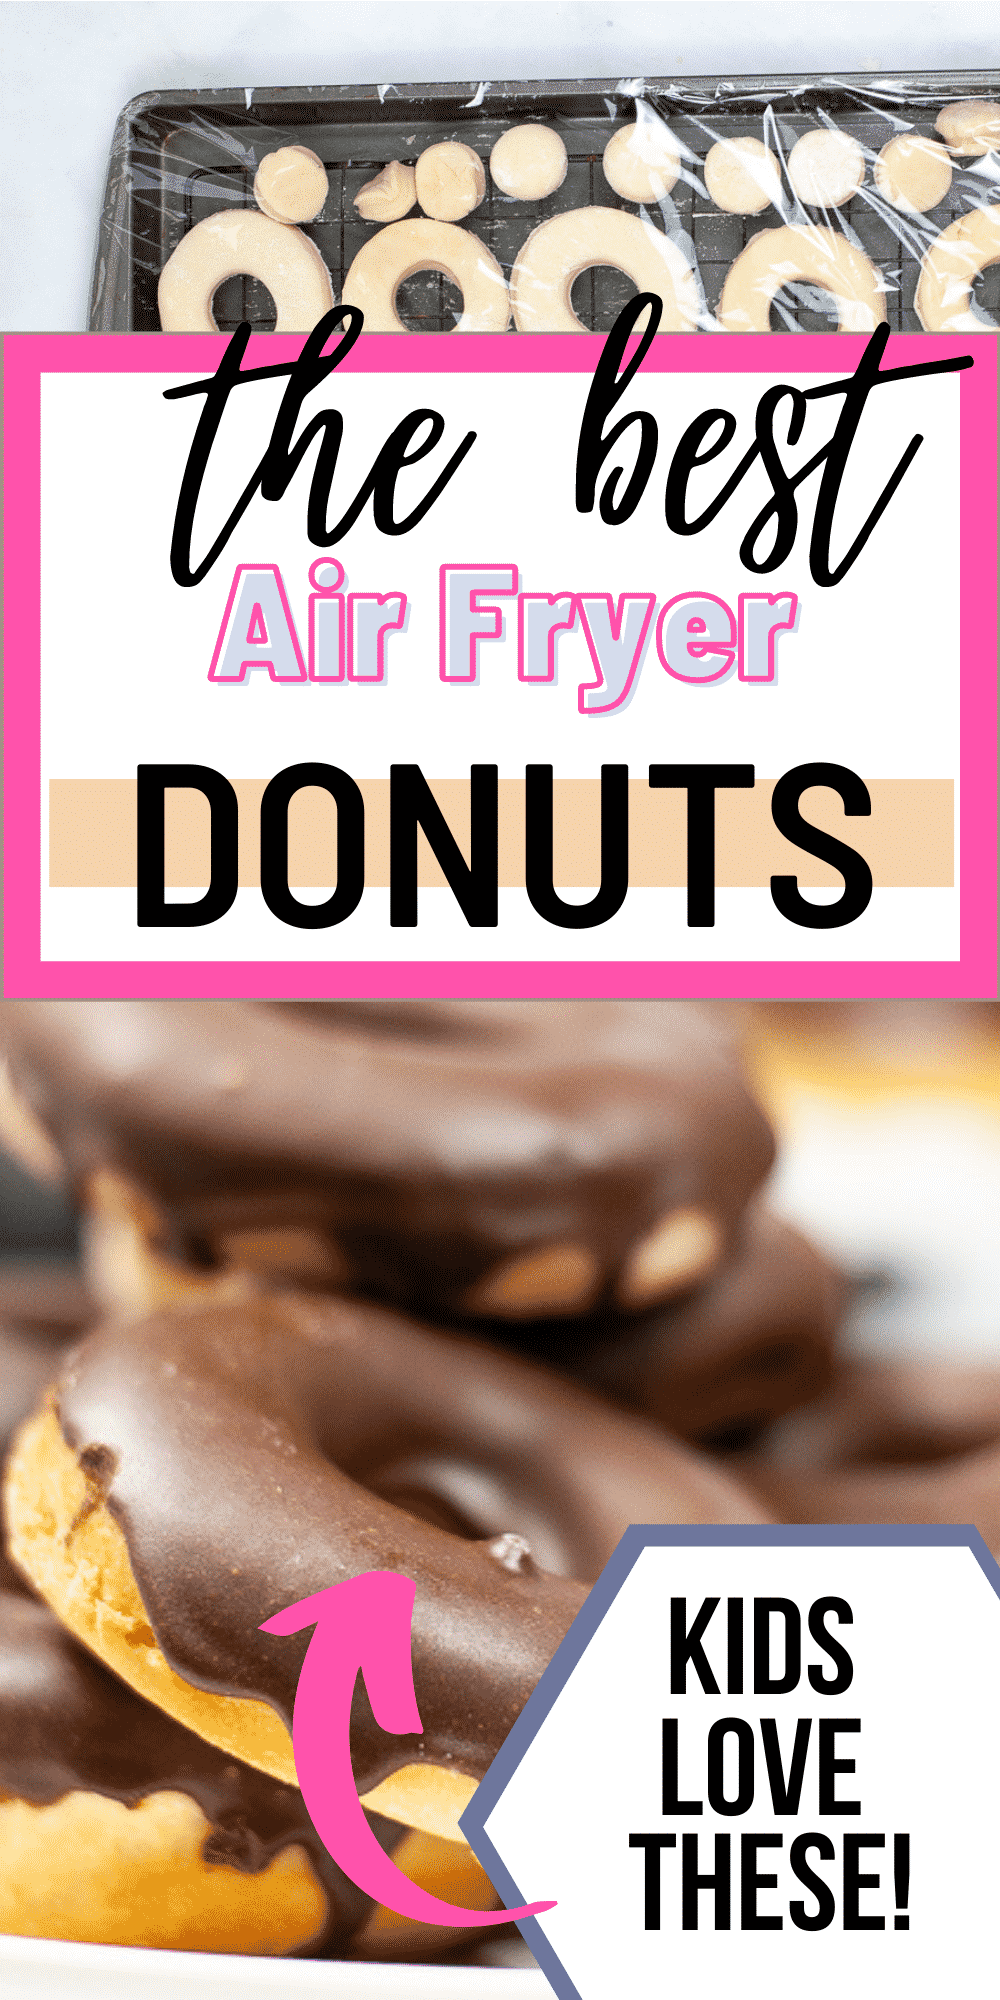 Air Fryer Chocolate Glazed Donuts are a copycat recipe of the famous Krispy Kreme donuts that everyone loves. Learn how to make yeasted donuts from scratch, in your air fryer, then top them with creamy chocolate frosting. #donuts via @vegetarianmamma